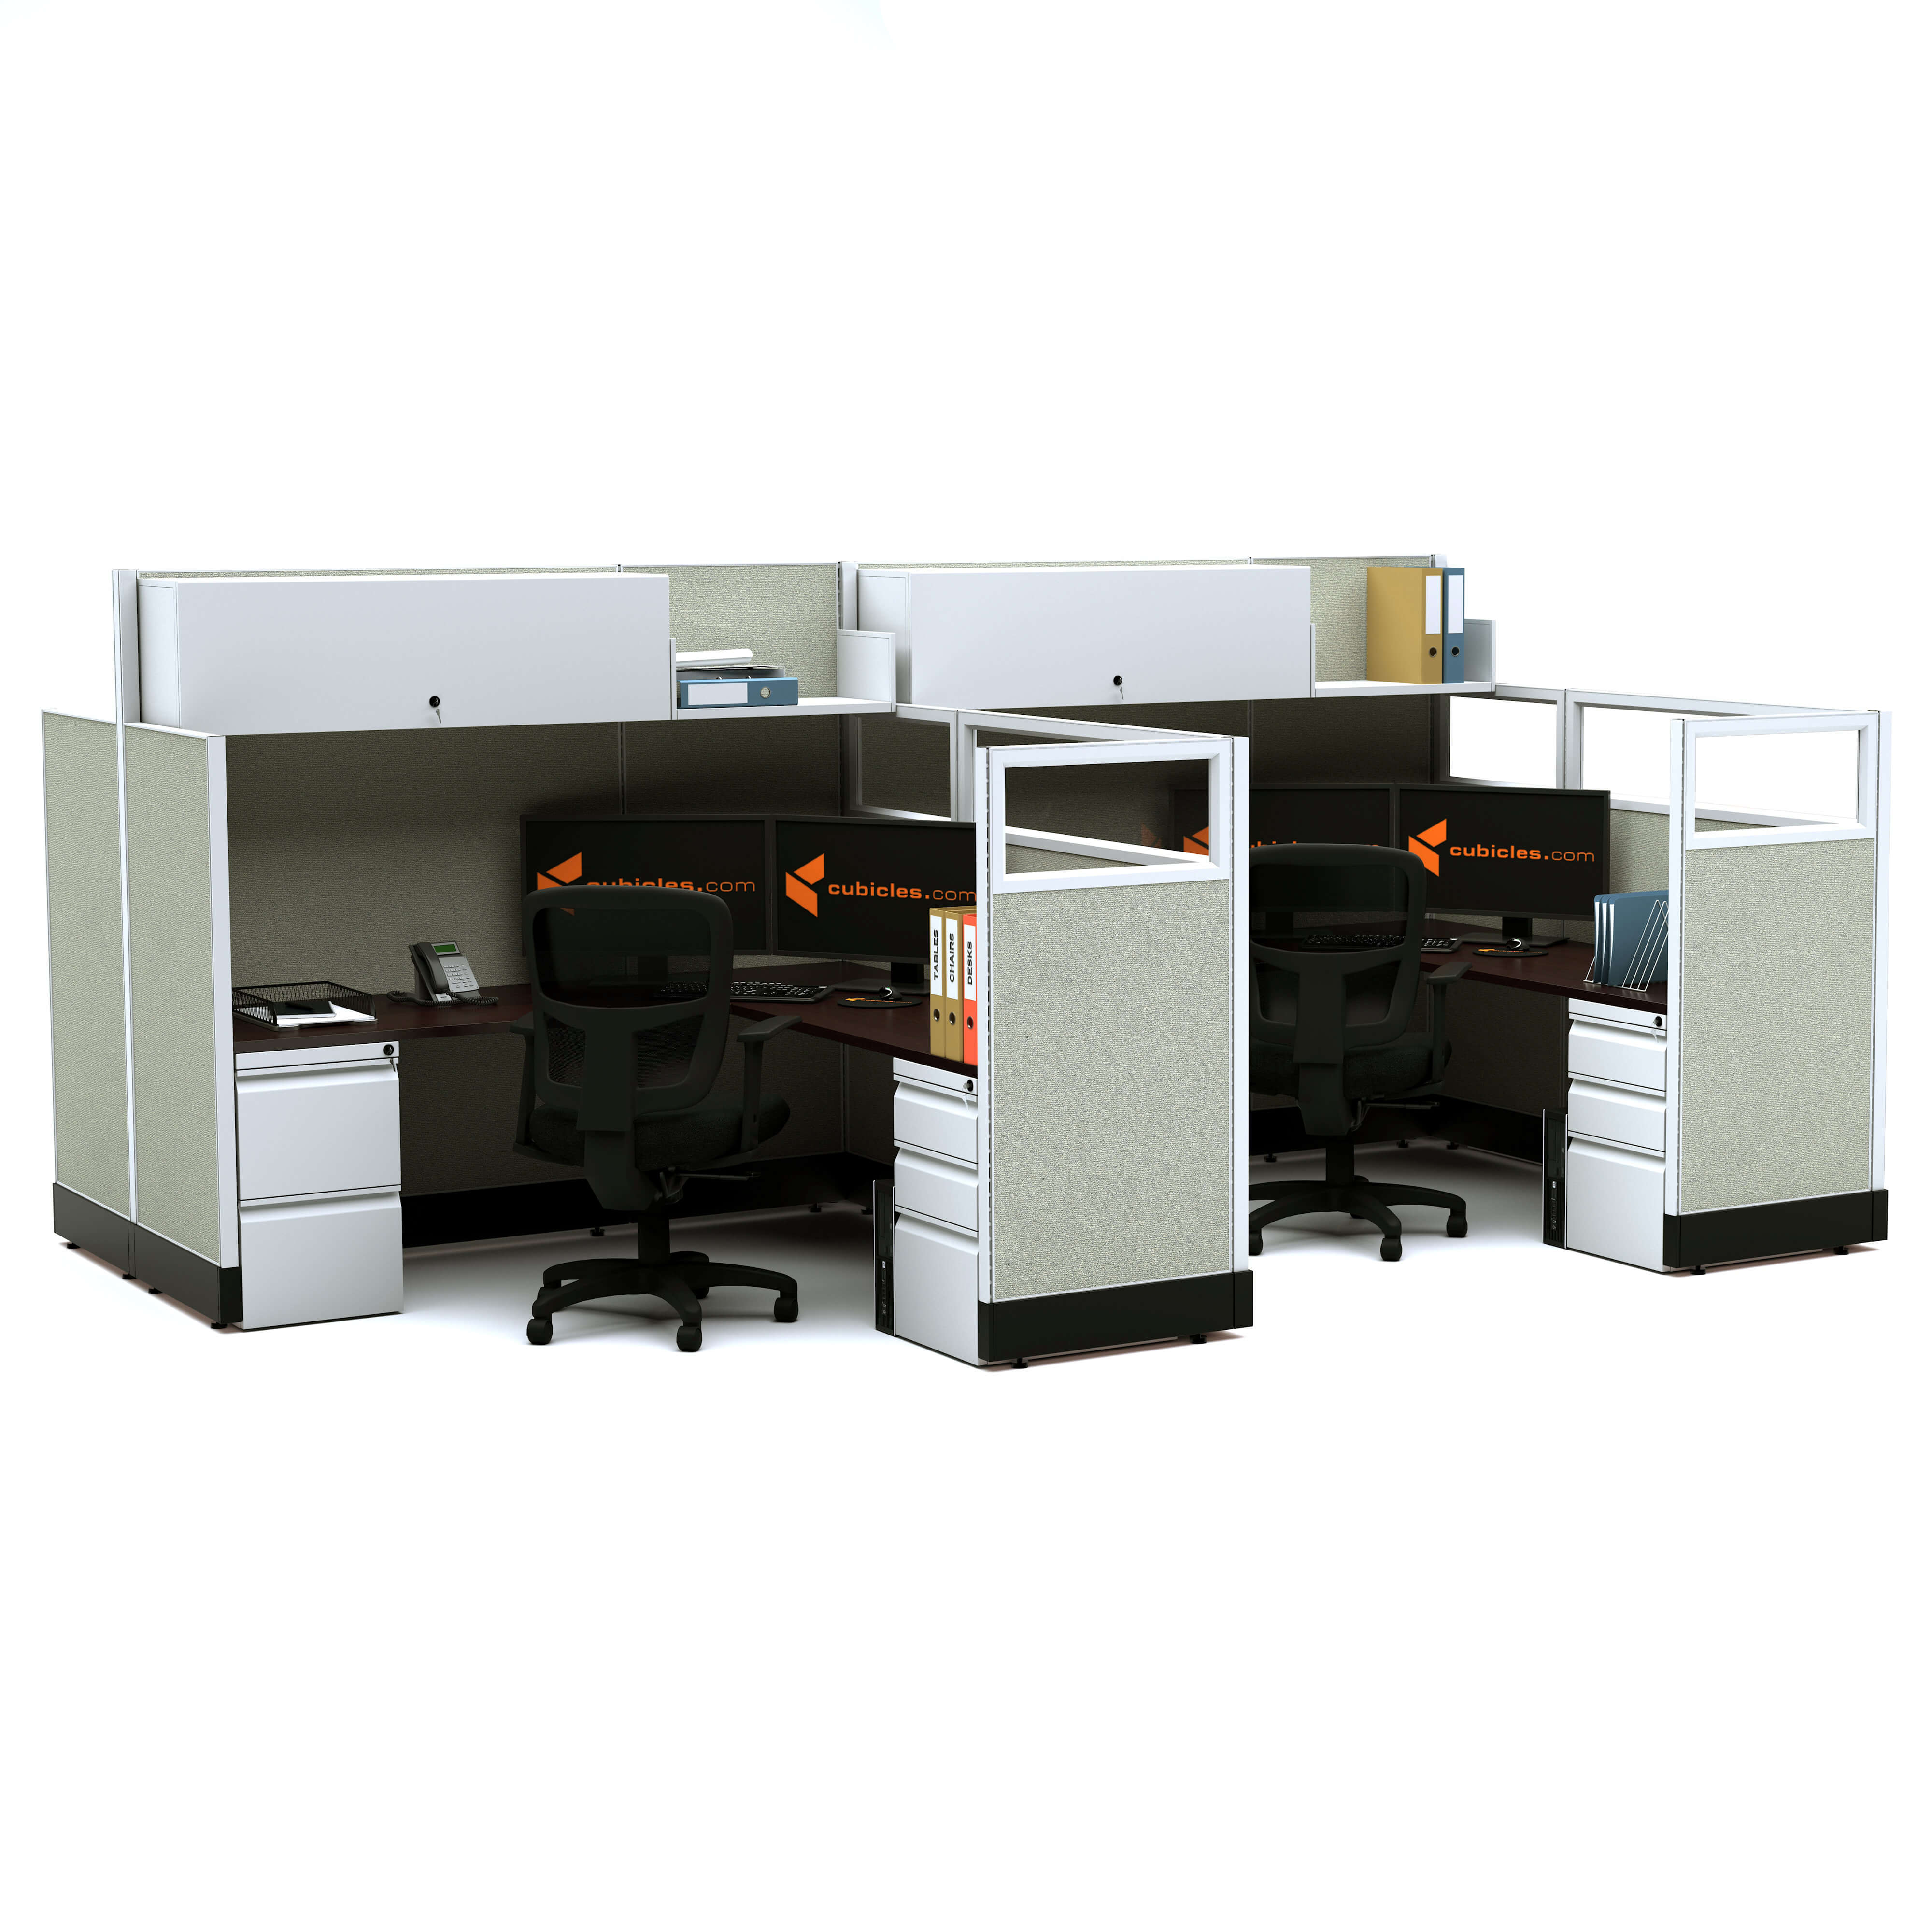 modular-office-furniture-partial-glass-office-cubicles-53-67h-4pack-cluster-non-powered.jpg